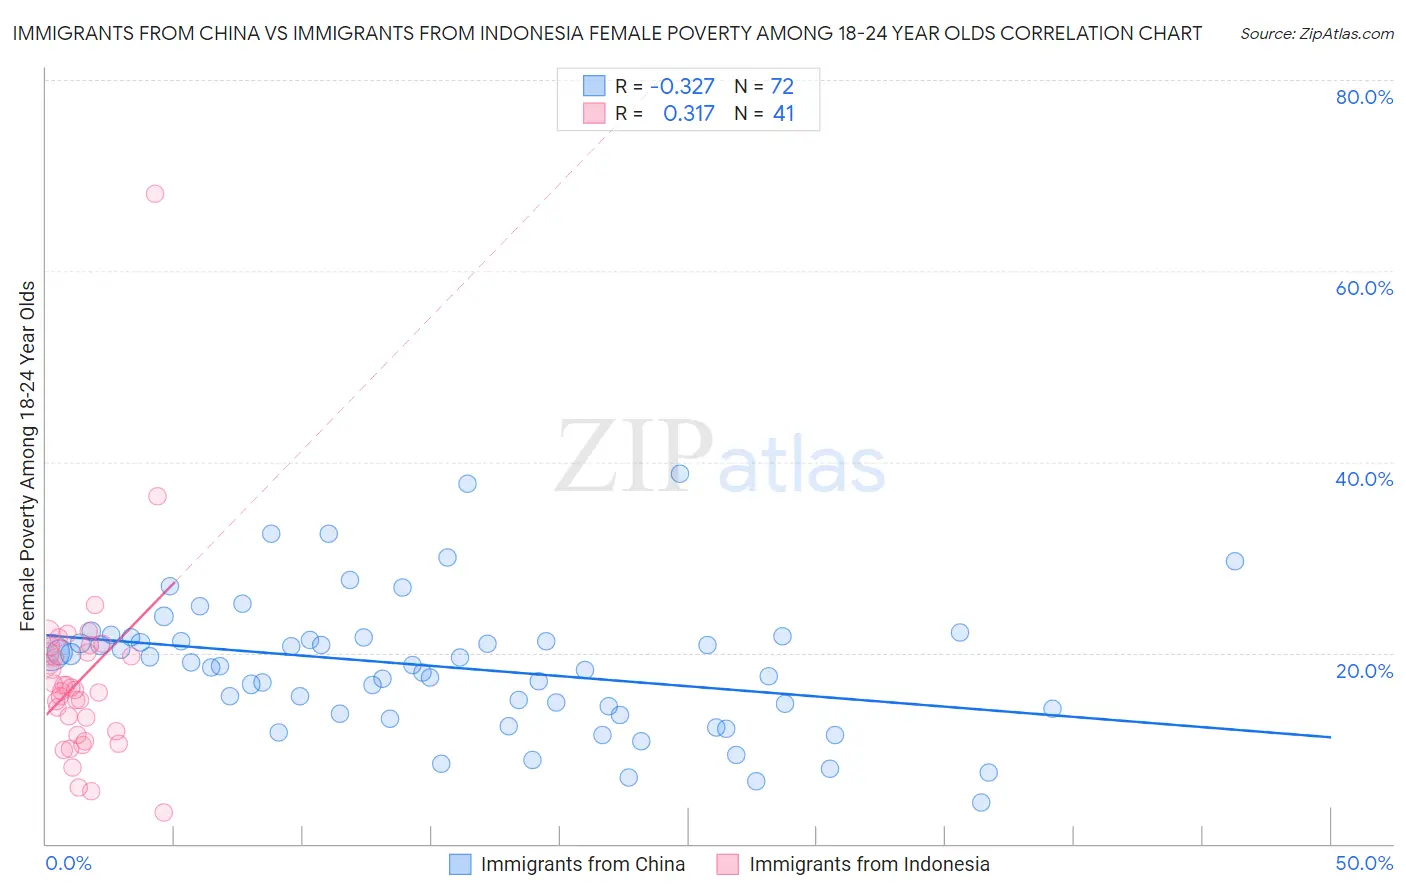 Immigrants from China vs Immigrants from Indonesia Female Poverty Among 18-24 Year Olds